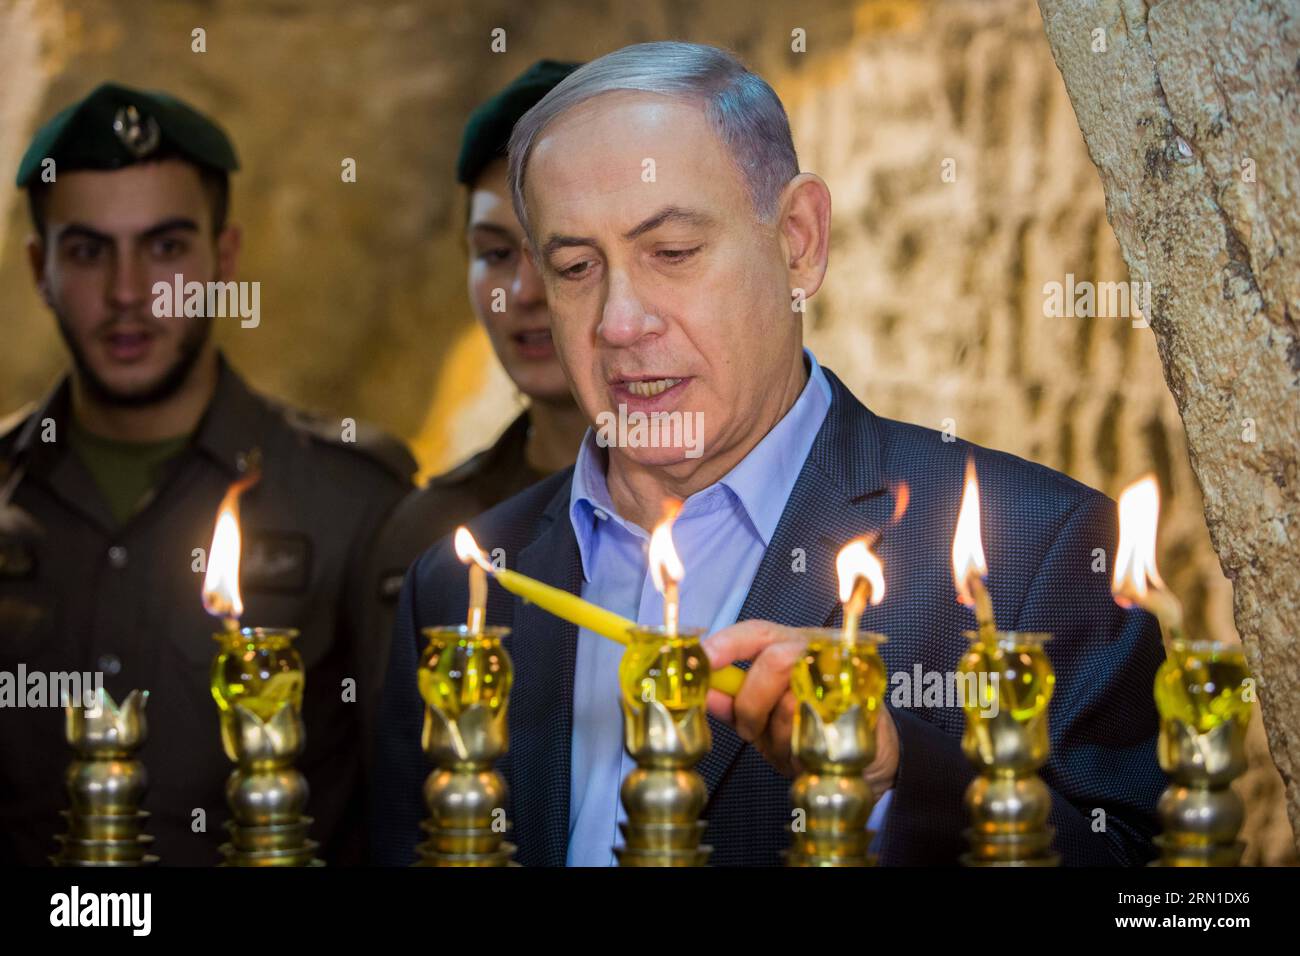 Israeli Prime Minister Benjamin Netanyahu (1st R) attends a ceremony to mark the fifth night of Hanukkah at the Western Wall in the Old City of Jerusalem, on Dec. 20, 2014. Hanukkah, also known as the Festival of Lights and Feast of Dedication, is an eight-day Jewish holiday commemorating the rededication of the Holy Temple (the Second Temple) in Jerusalem at the time of the Maccabean Revolt against the Seleucid Empire of the 2nd Century B.C. Hanukkah is observed for eight nights and days, starting on the 25th day of Kislev according to the Hebrew calendar, which may occur at any time from lat Stock Photo